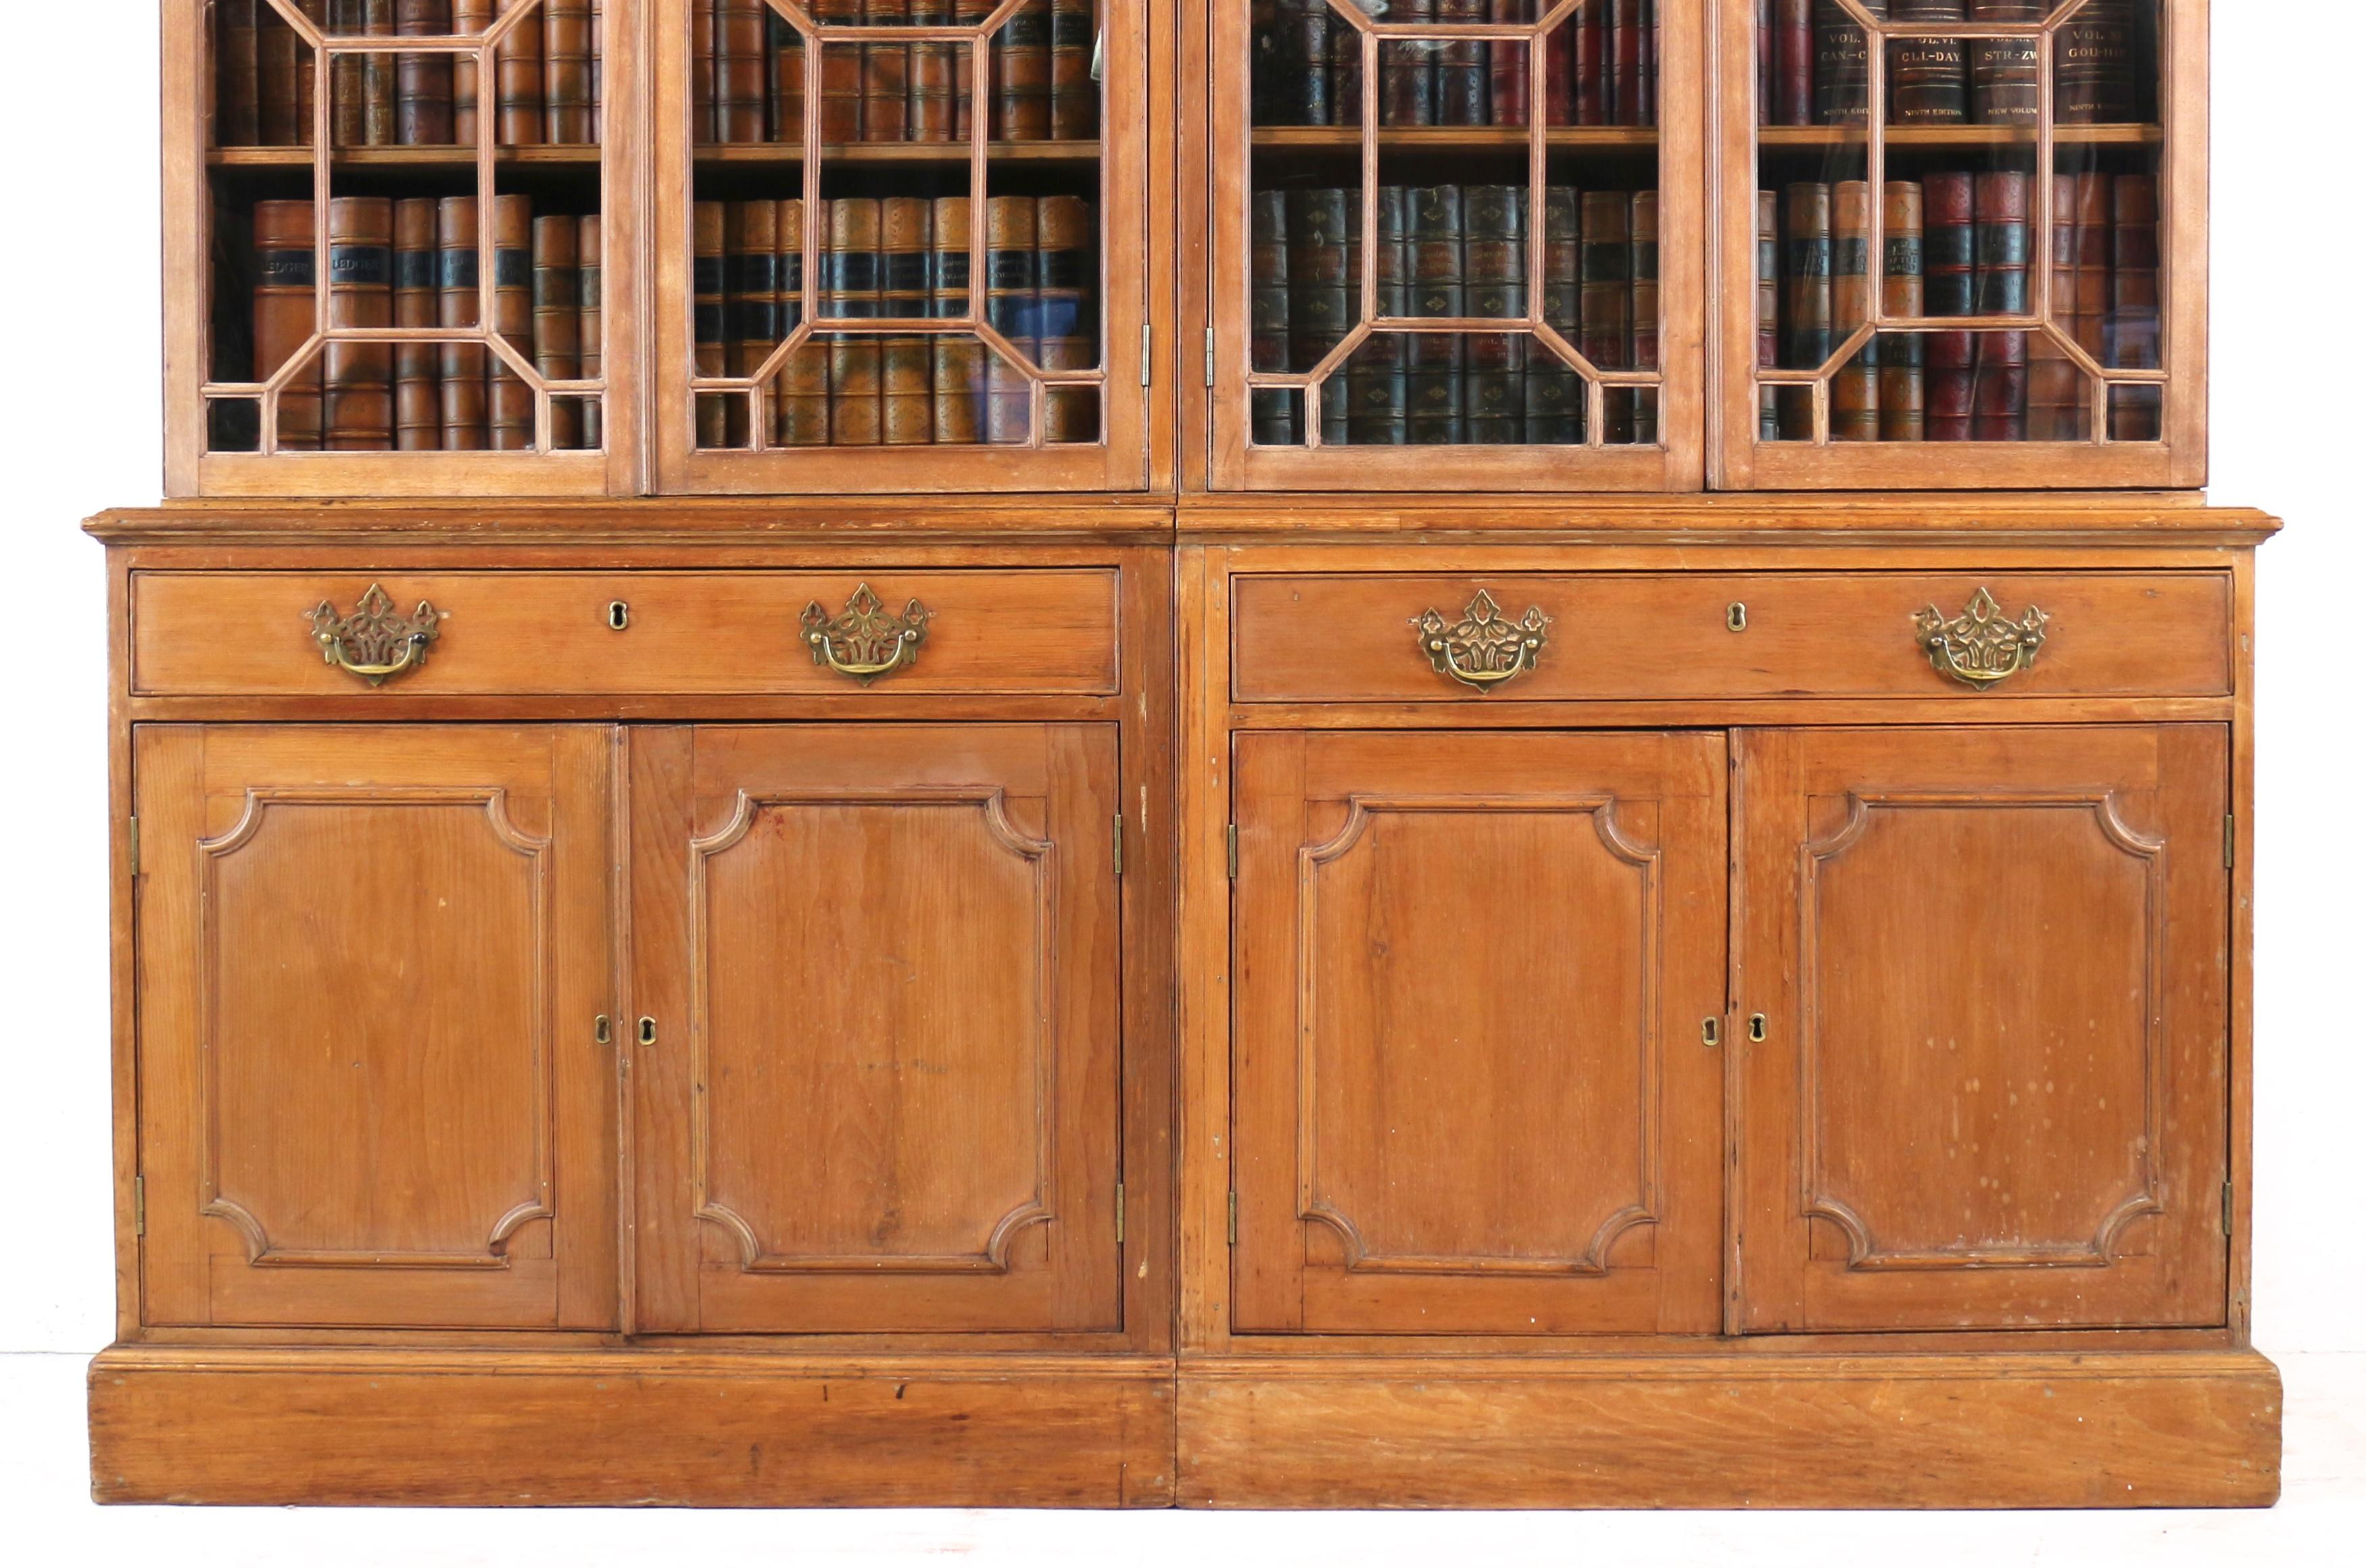 The English Country House Antiques English George III Chippendale Period Pine Country House Double Bookcase Bon état - En vente à Glasgow, GB